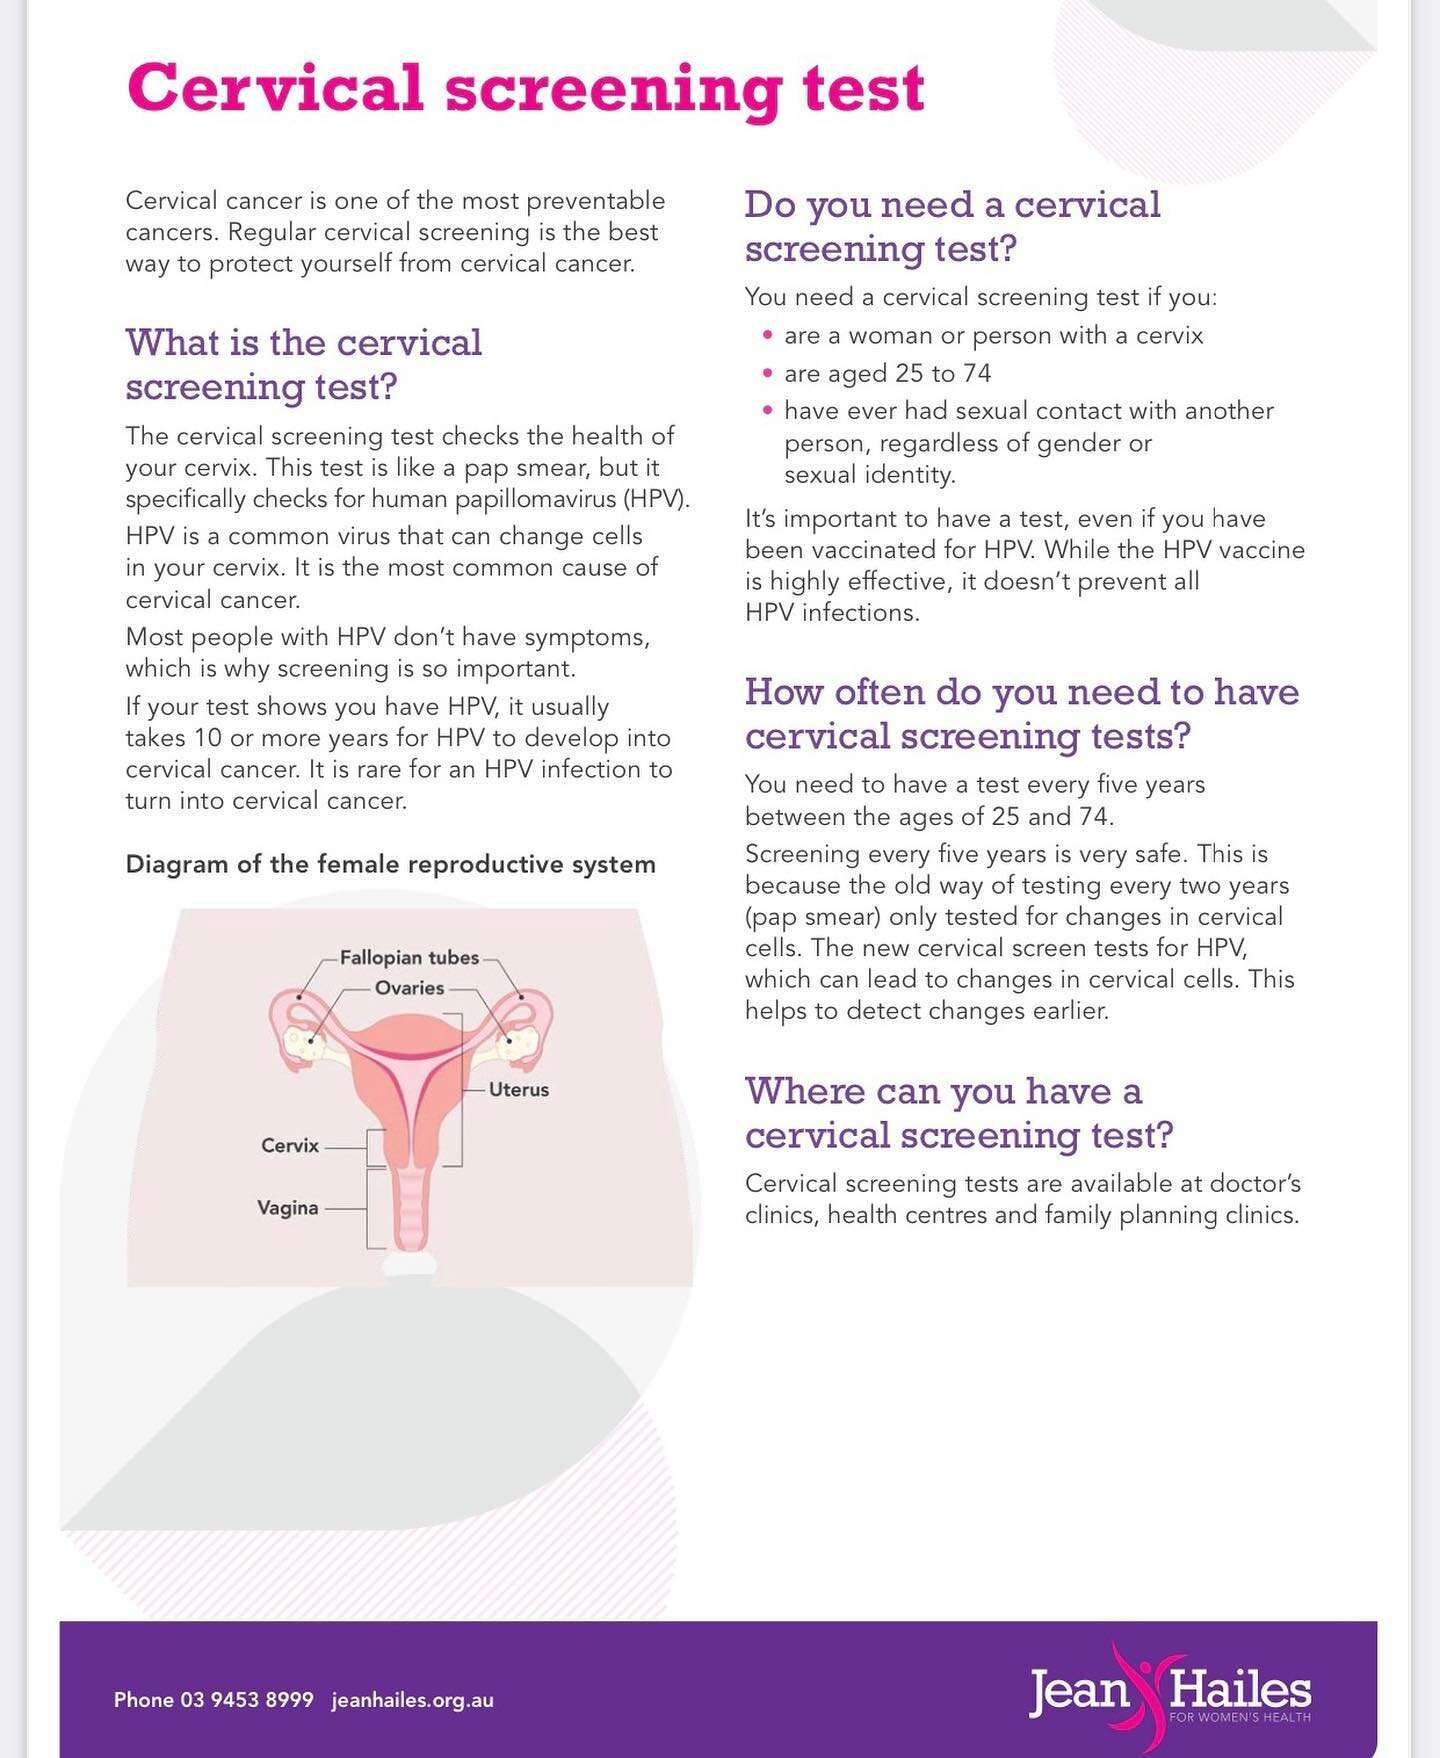 🌸WOMENS Health Week🌸 
Women are screened for cervical cancer from the age of 25-74 yrs 
 (and only once you have started having sex)
This test is now called a CST - 'Cervical Screening Test ' and is done every five years if your last test  was norm